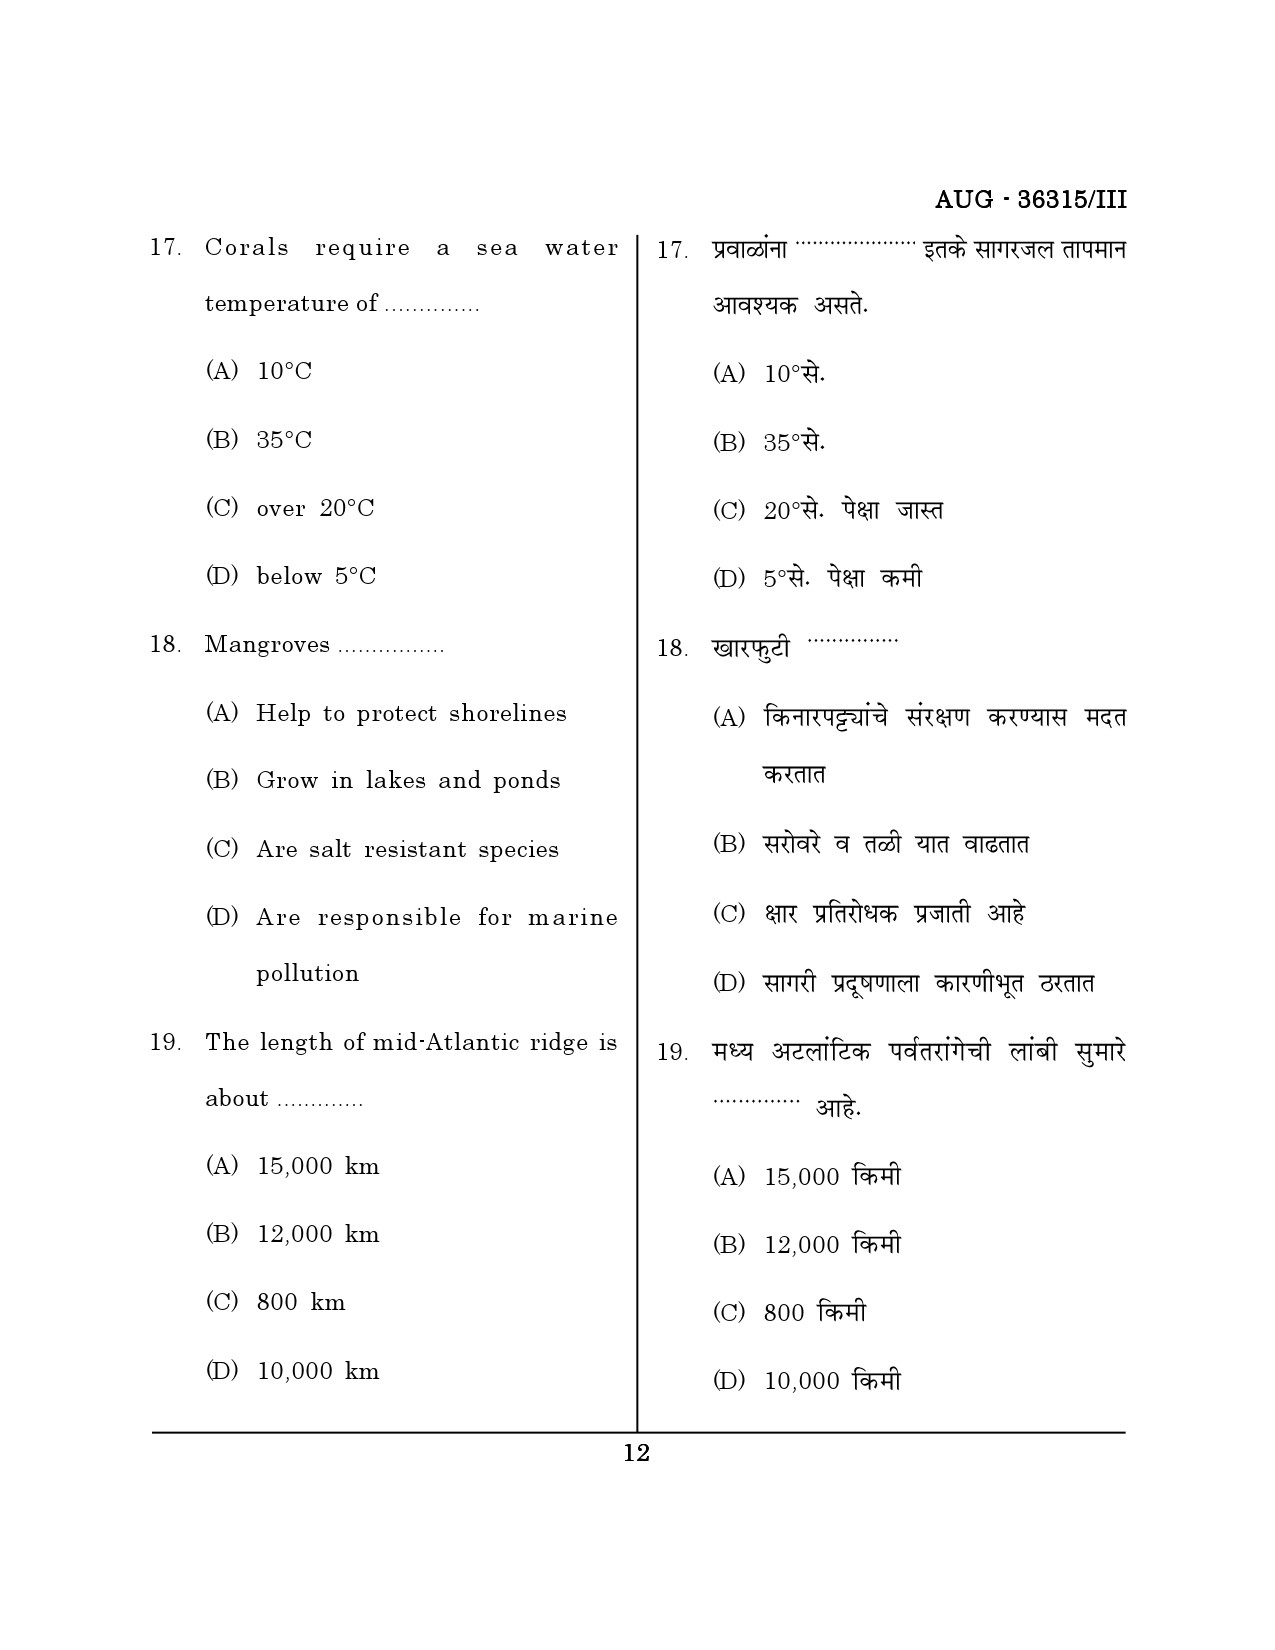 Maharashtra SET Geography Question Paper III August 2015 11